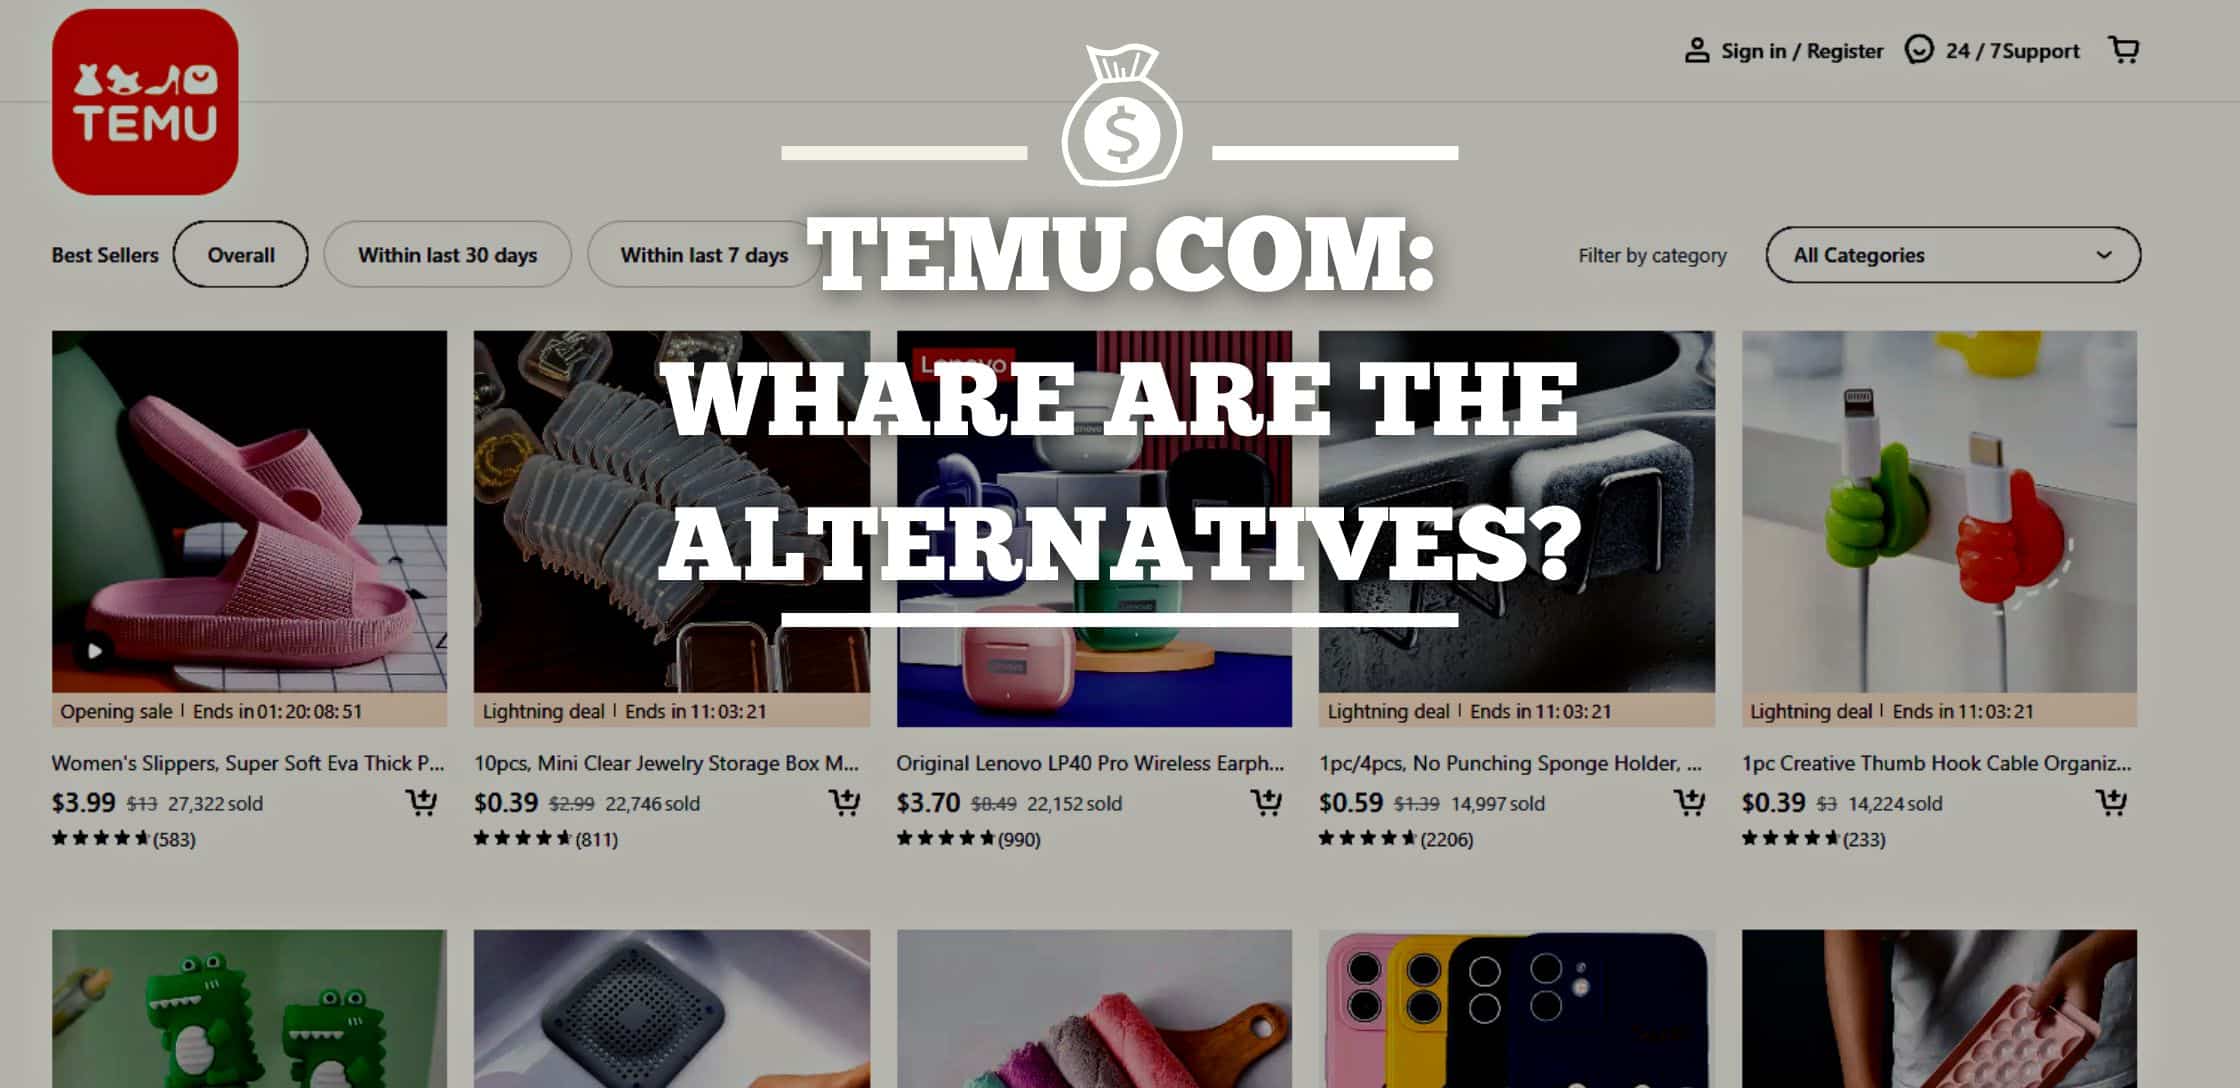 Temu: Is the price too good to be true?